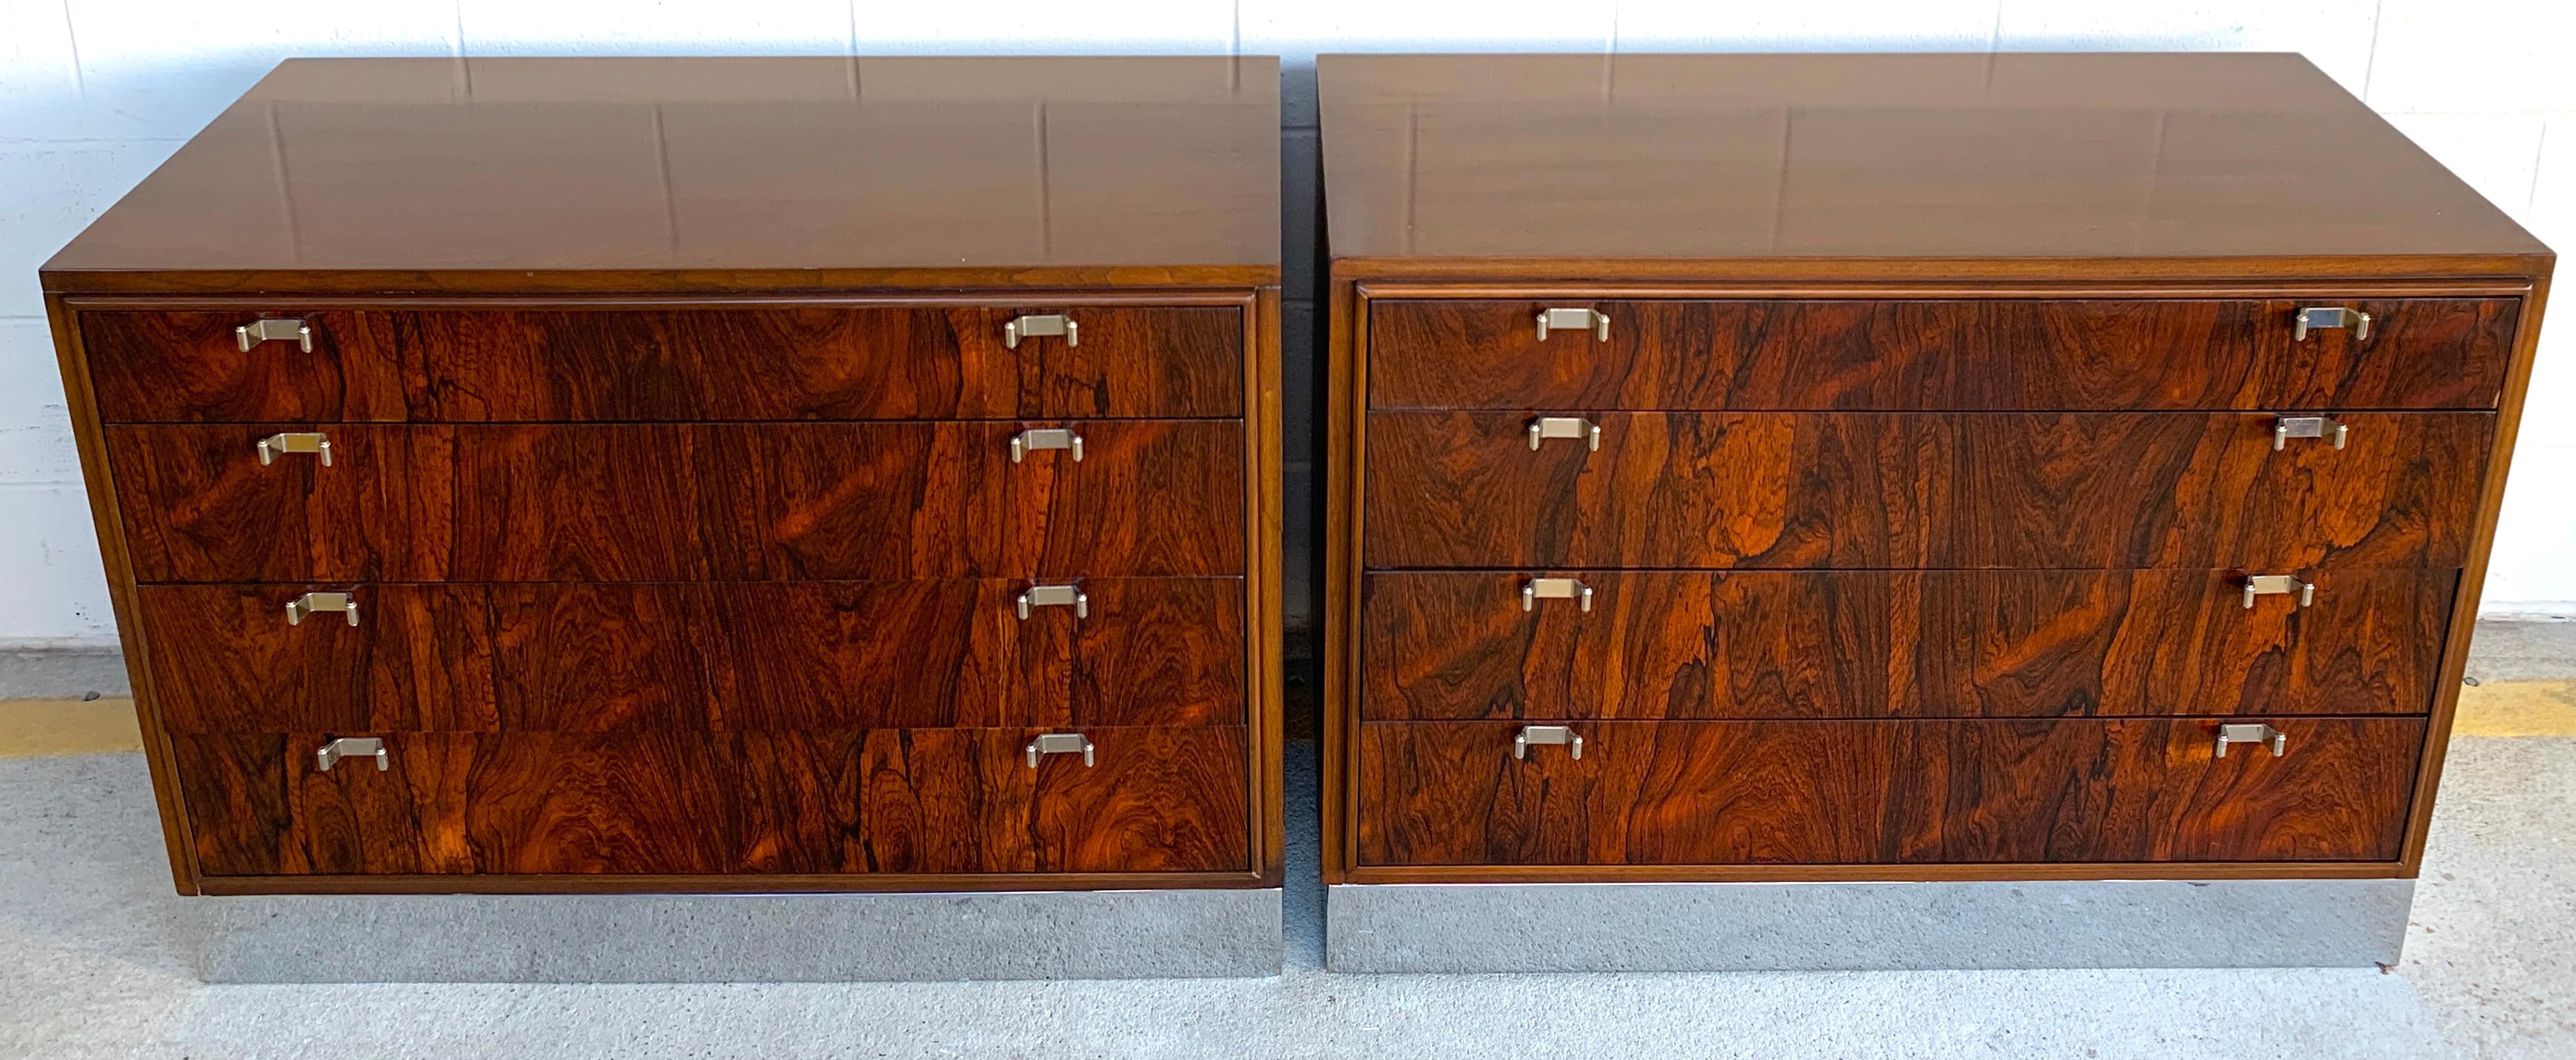 Beautiful pair of John Stuart rosewood and polished chrome chests, restored
each one with a mahogany case with four inset rosewood front drawers, raised on a polished chrome pedestal base.